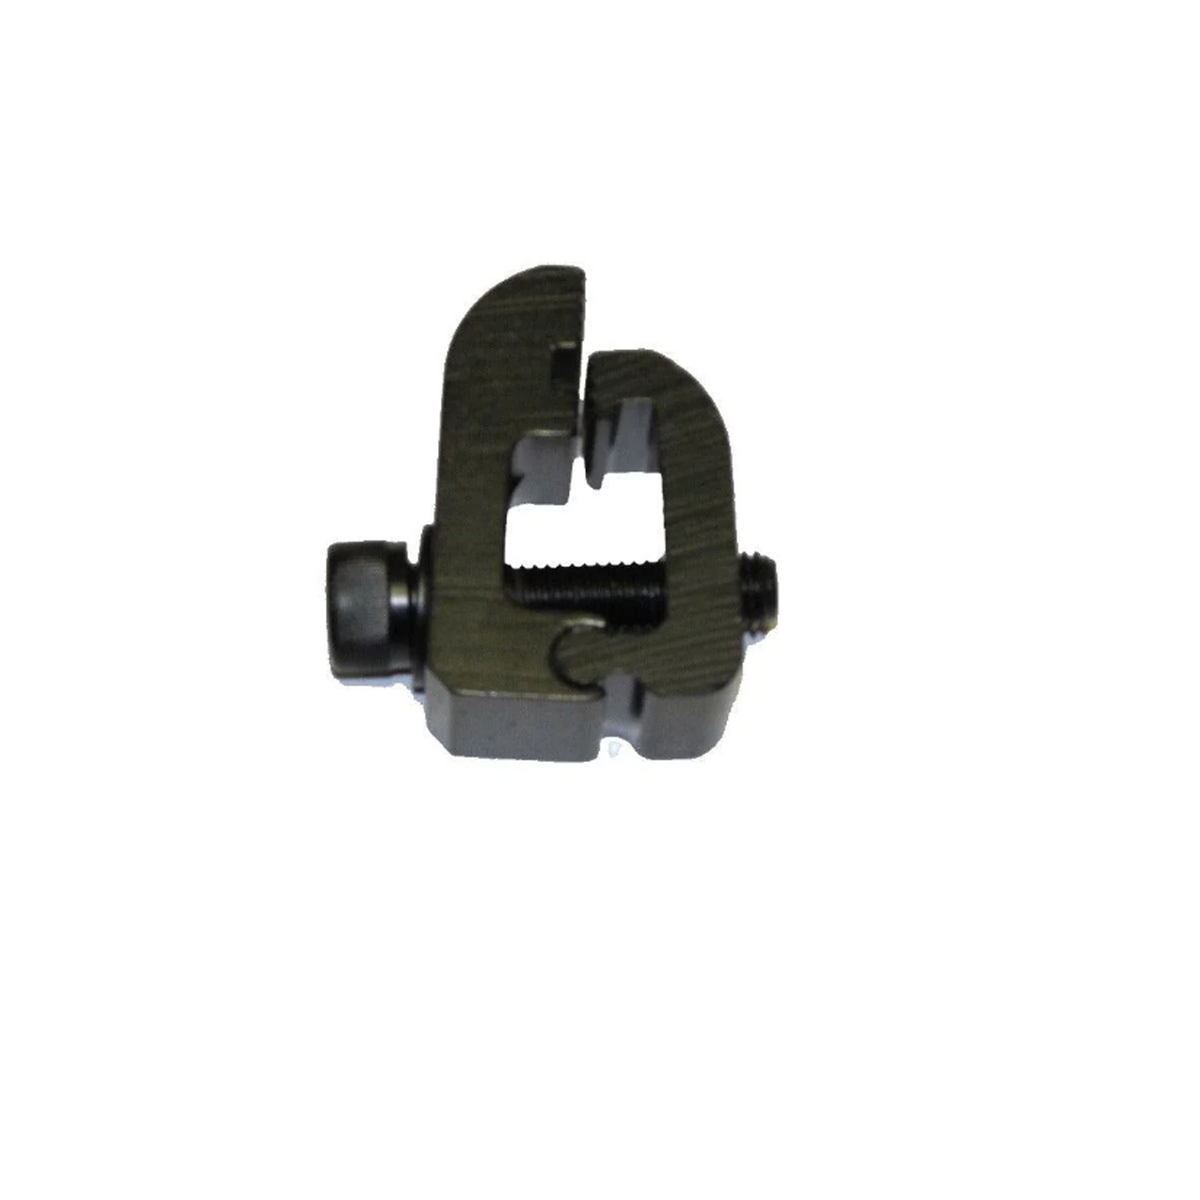 Replacement Armadillo Clamp - For Hilux / Ford Ranger / L200